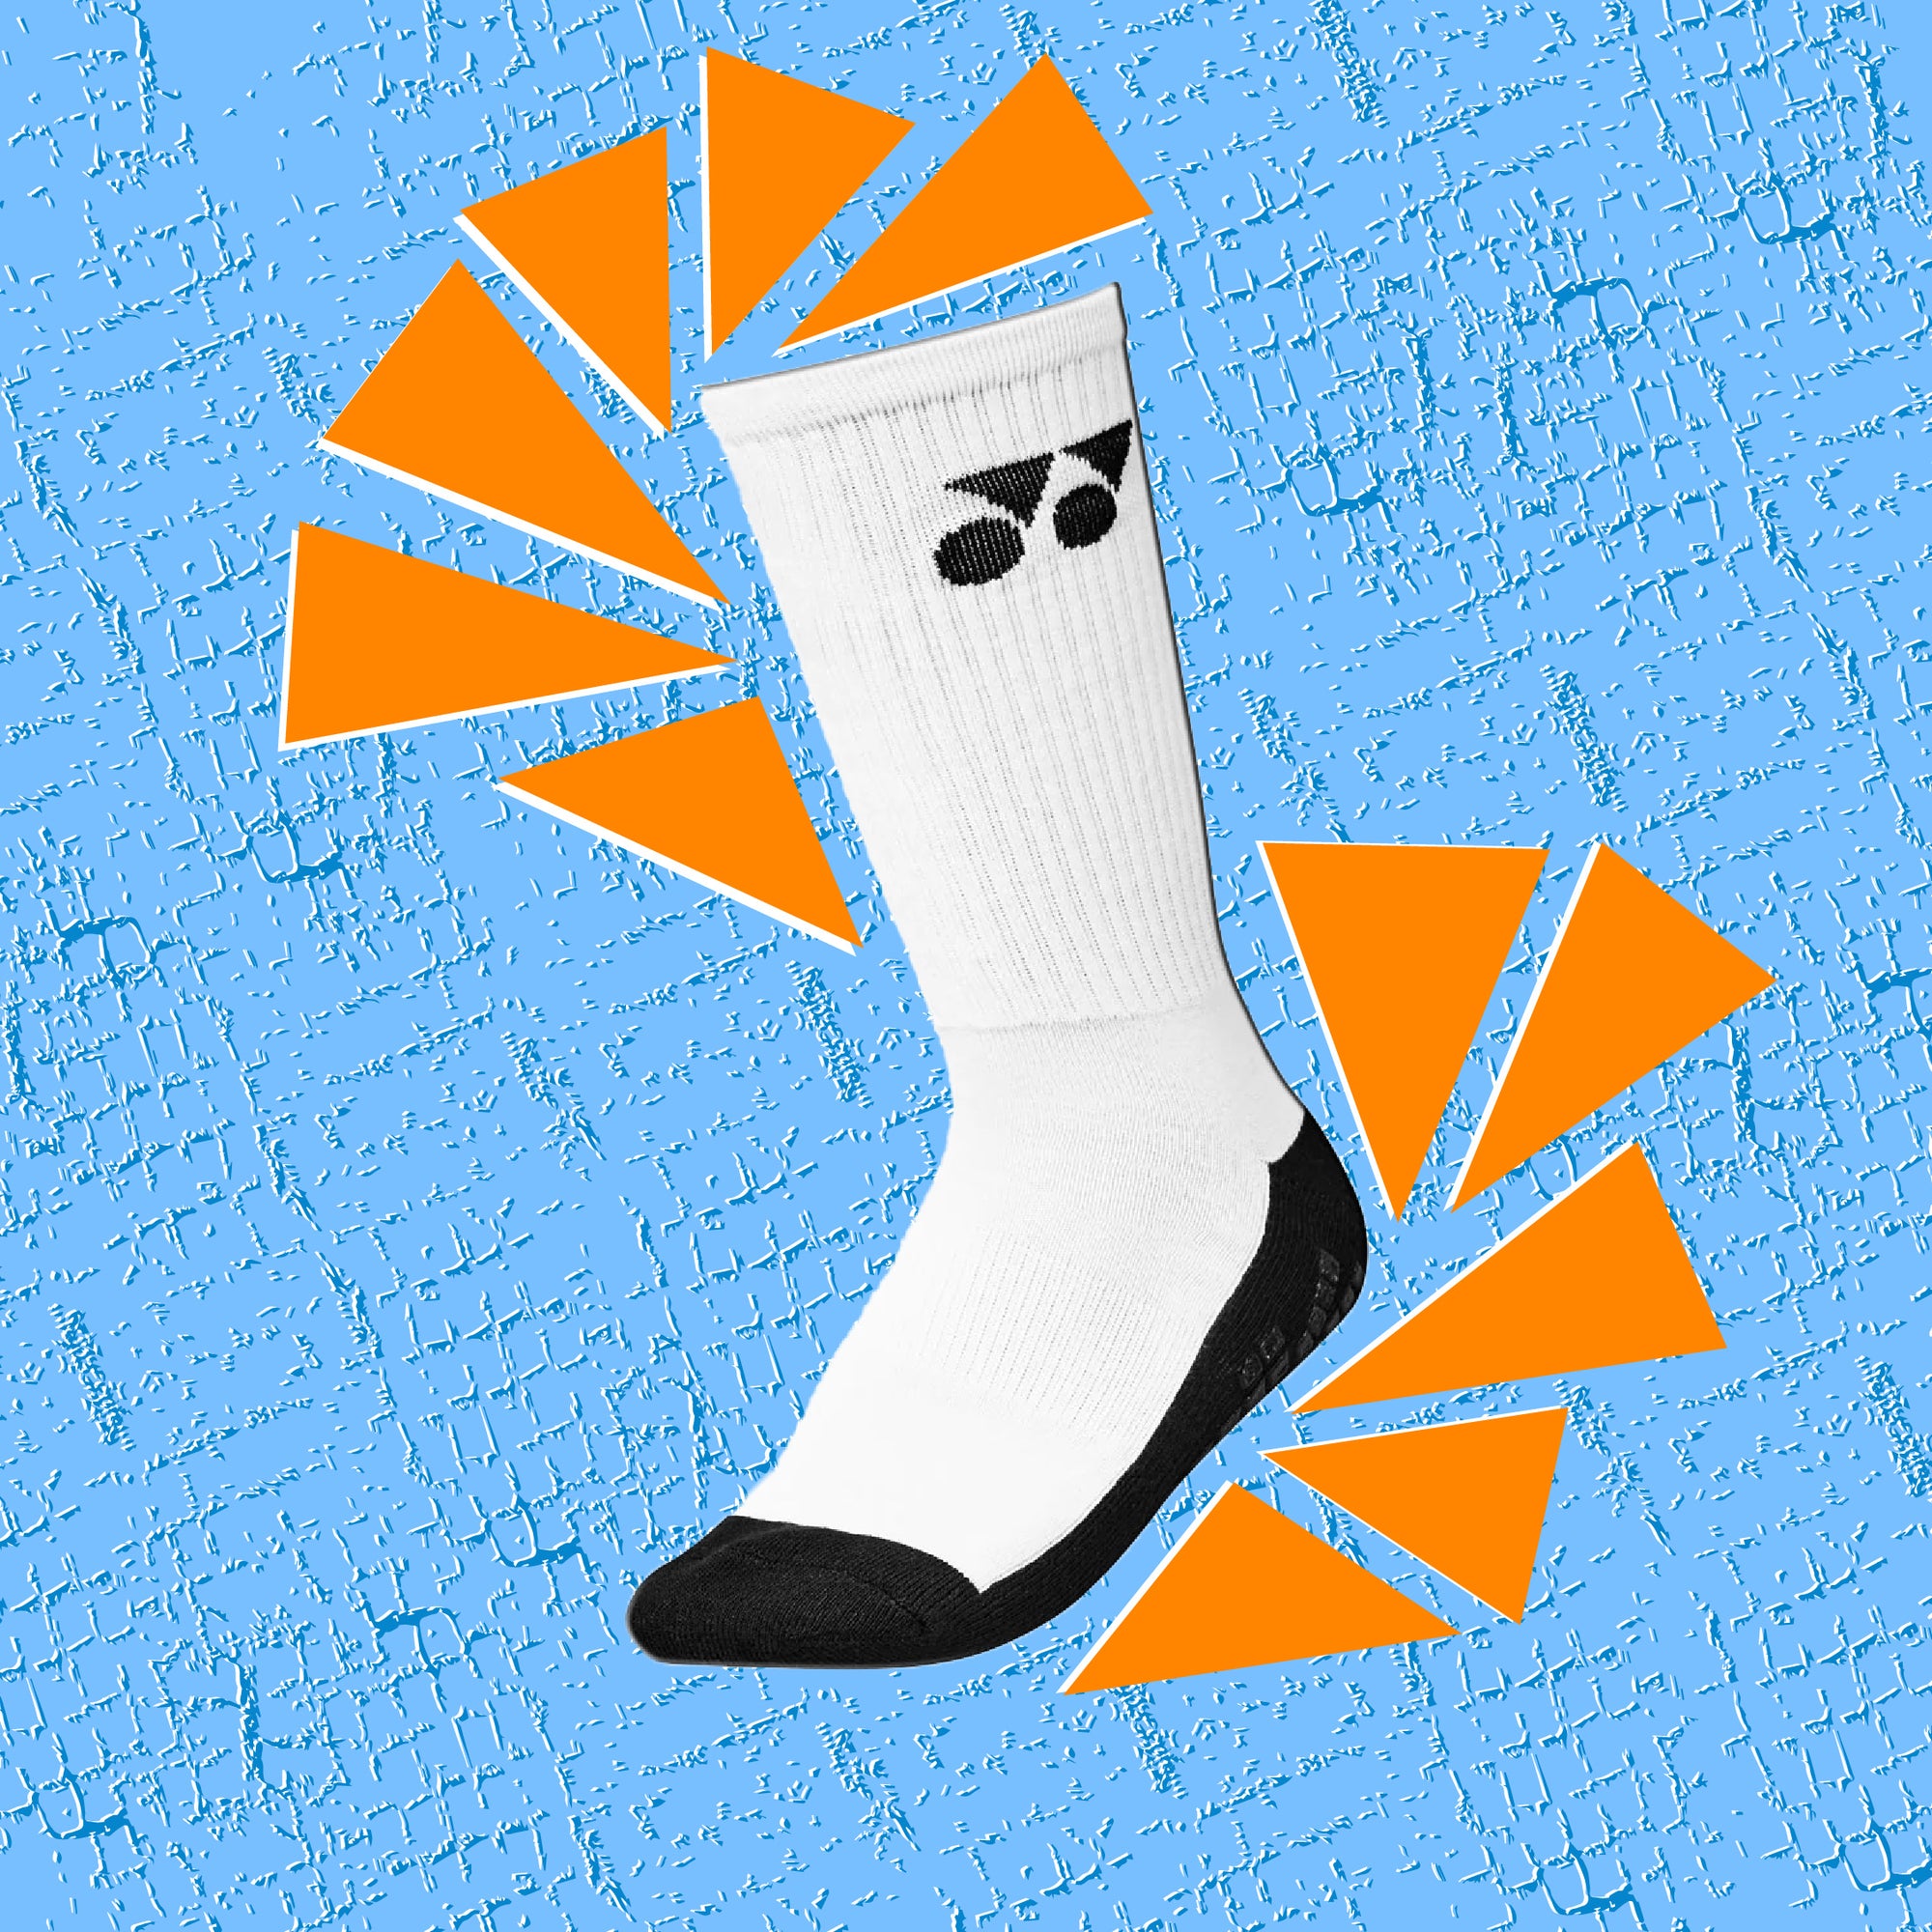 Why are grip socks an on-court essential?